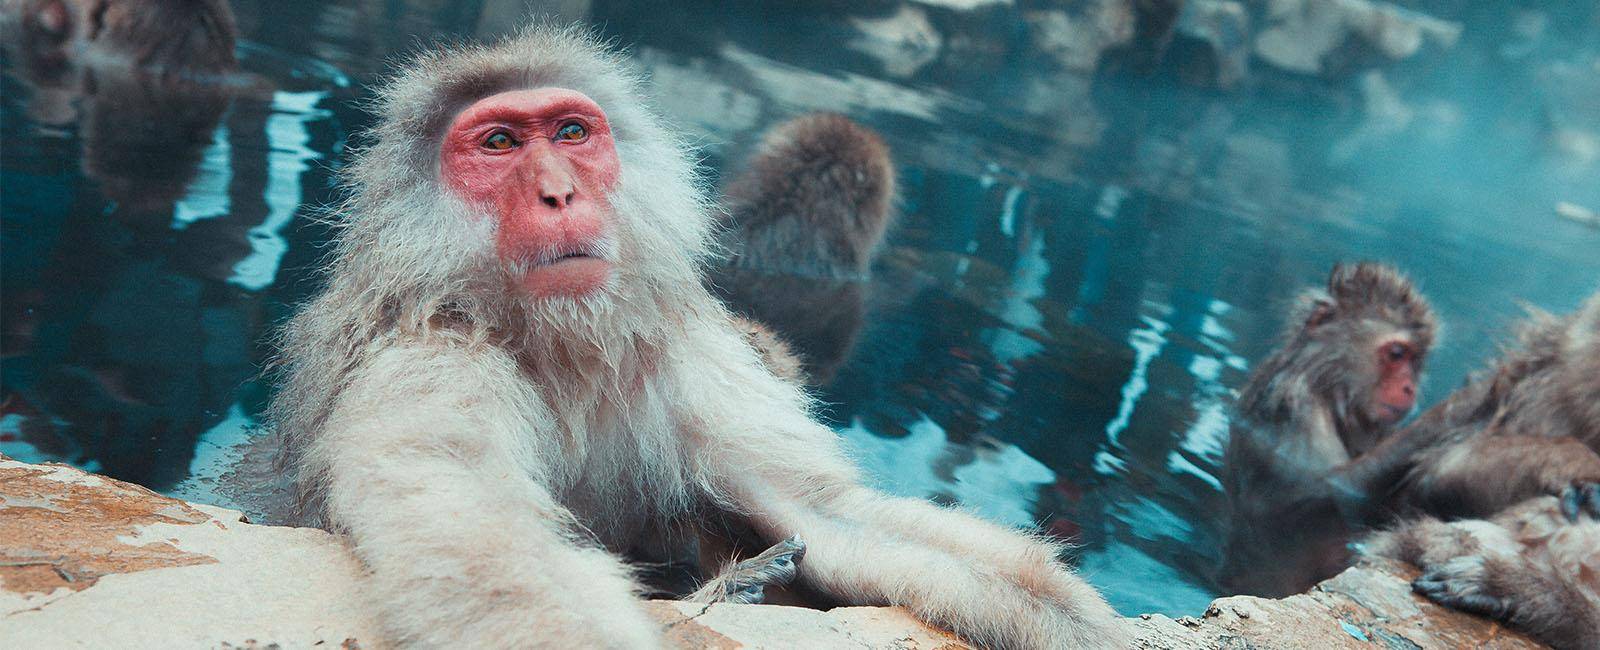 A Japanese macaque bathes in thermal waters, with other monkeys in the background